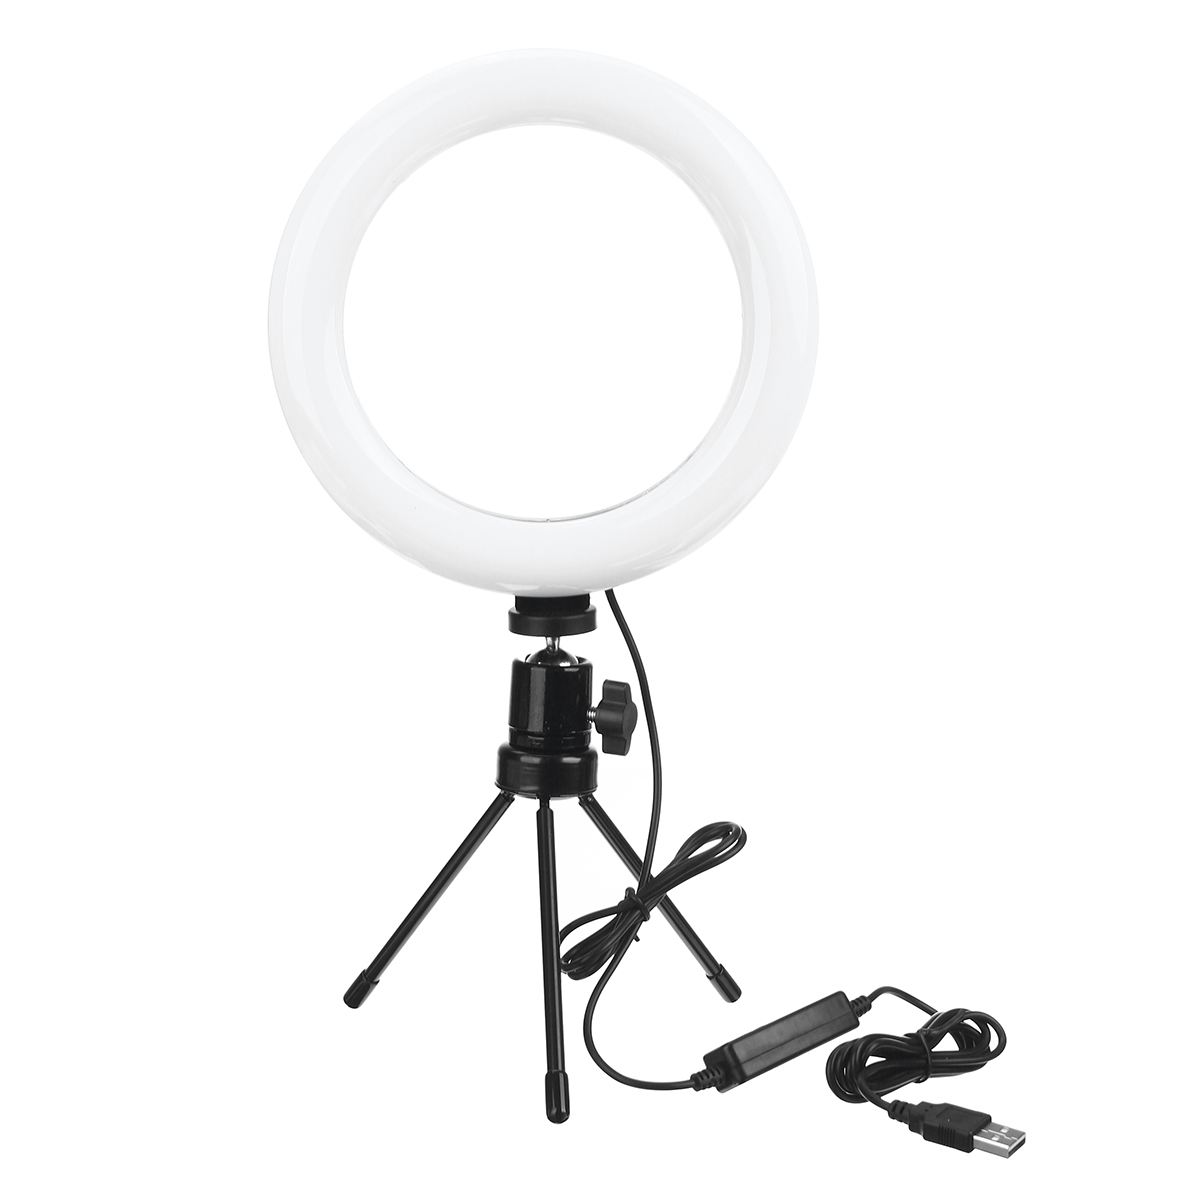 Dimmable-LED-Ring-Light-Lamp-18CM-26CM-Fill-Light-for-Makeup-Live-Stream-Selfie-Photography-Video-Re-1680025-8